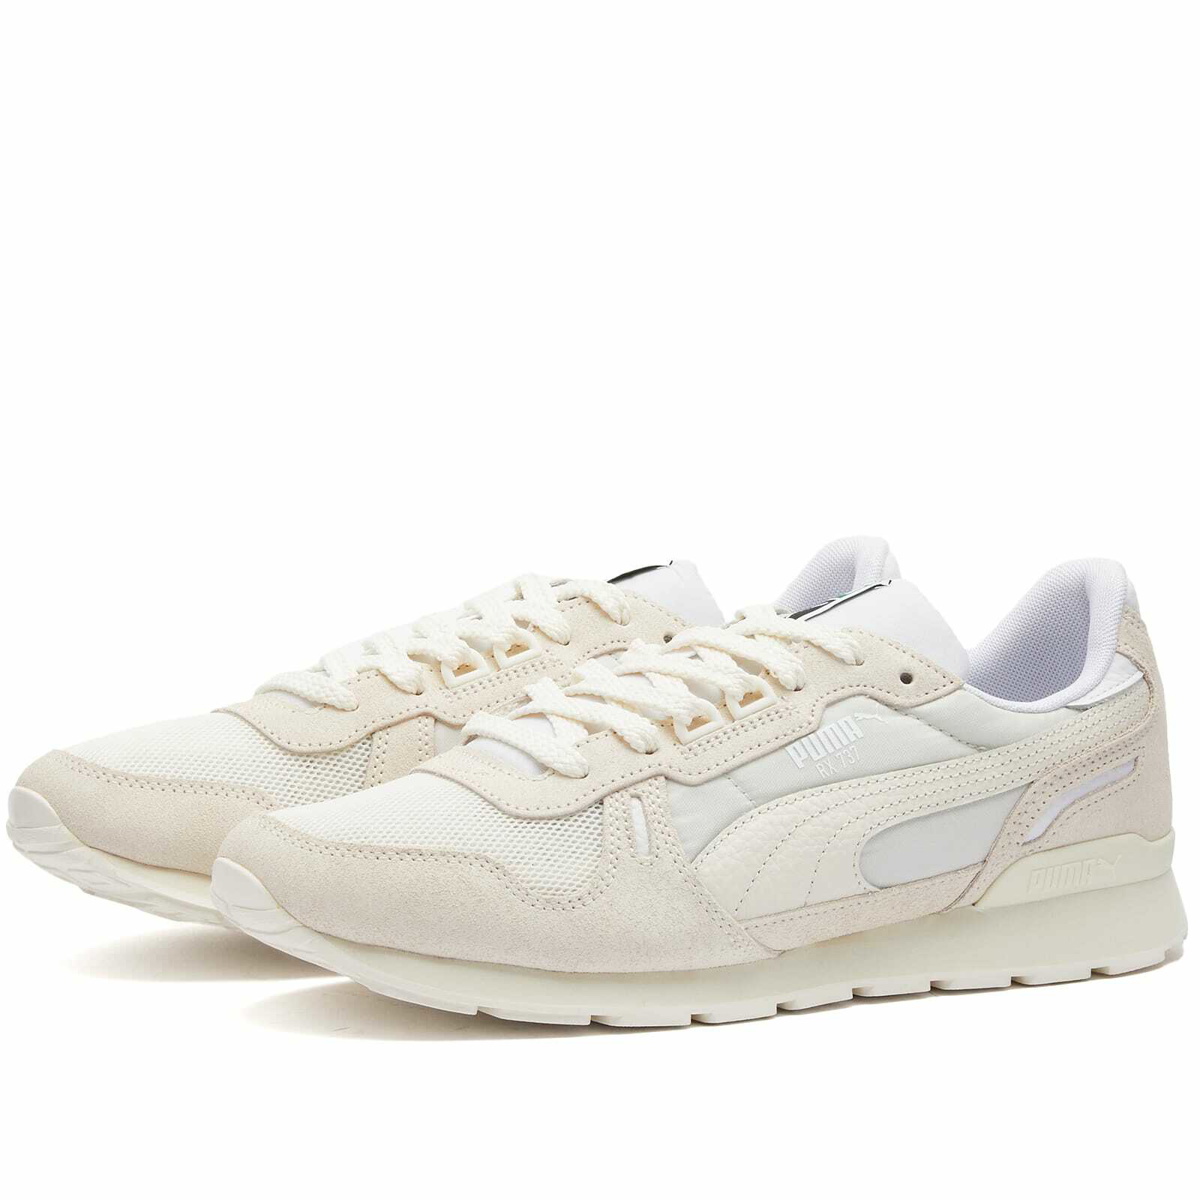 Puma Men's RX 737 Sneakers in Frosted Ivory/Puma White Puma